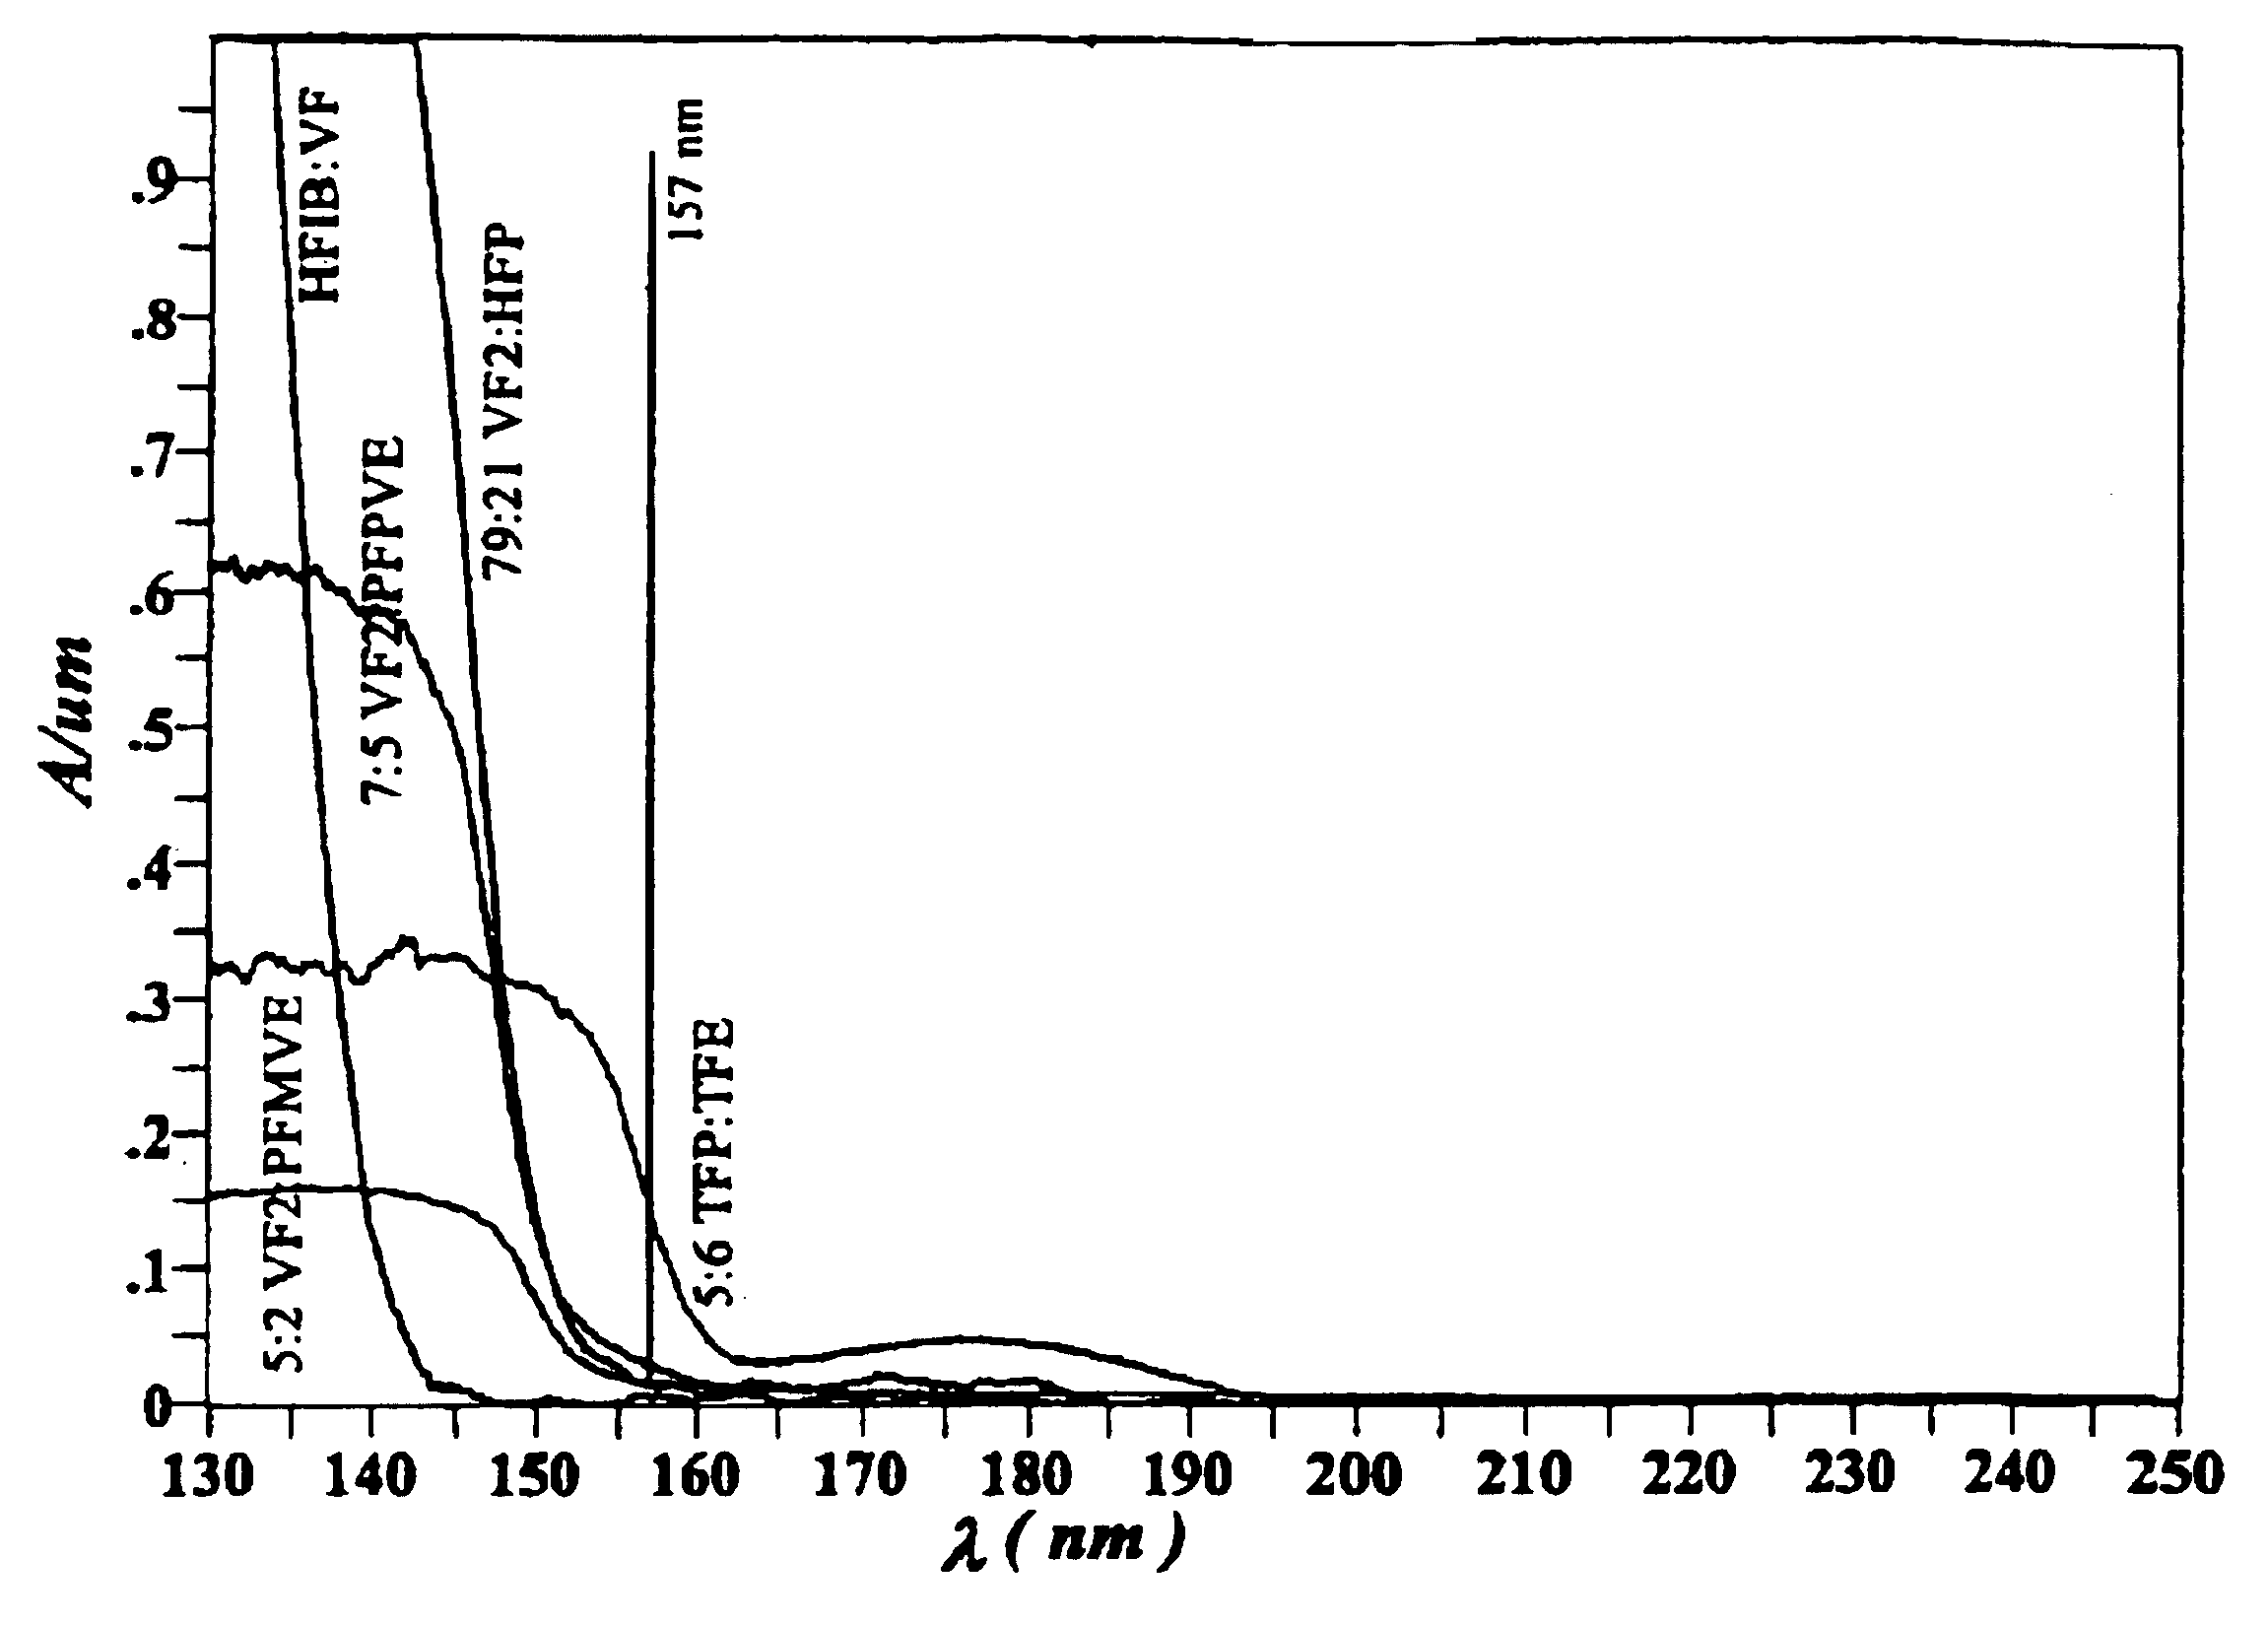 Ultraviolet and vacuum ultraviolet transparent polymer compositions and their uses